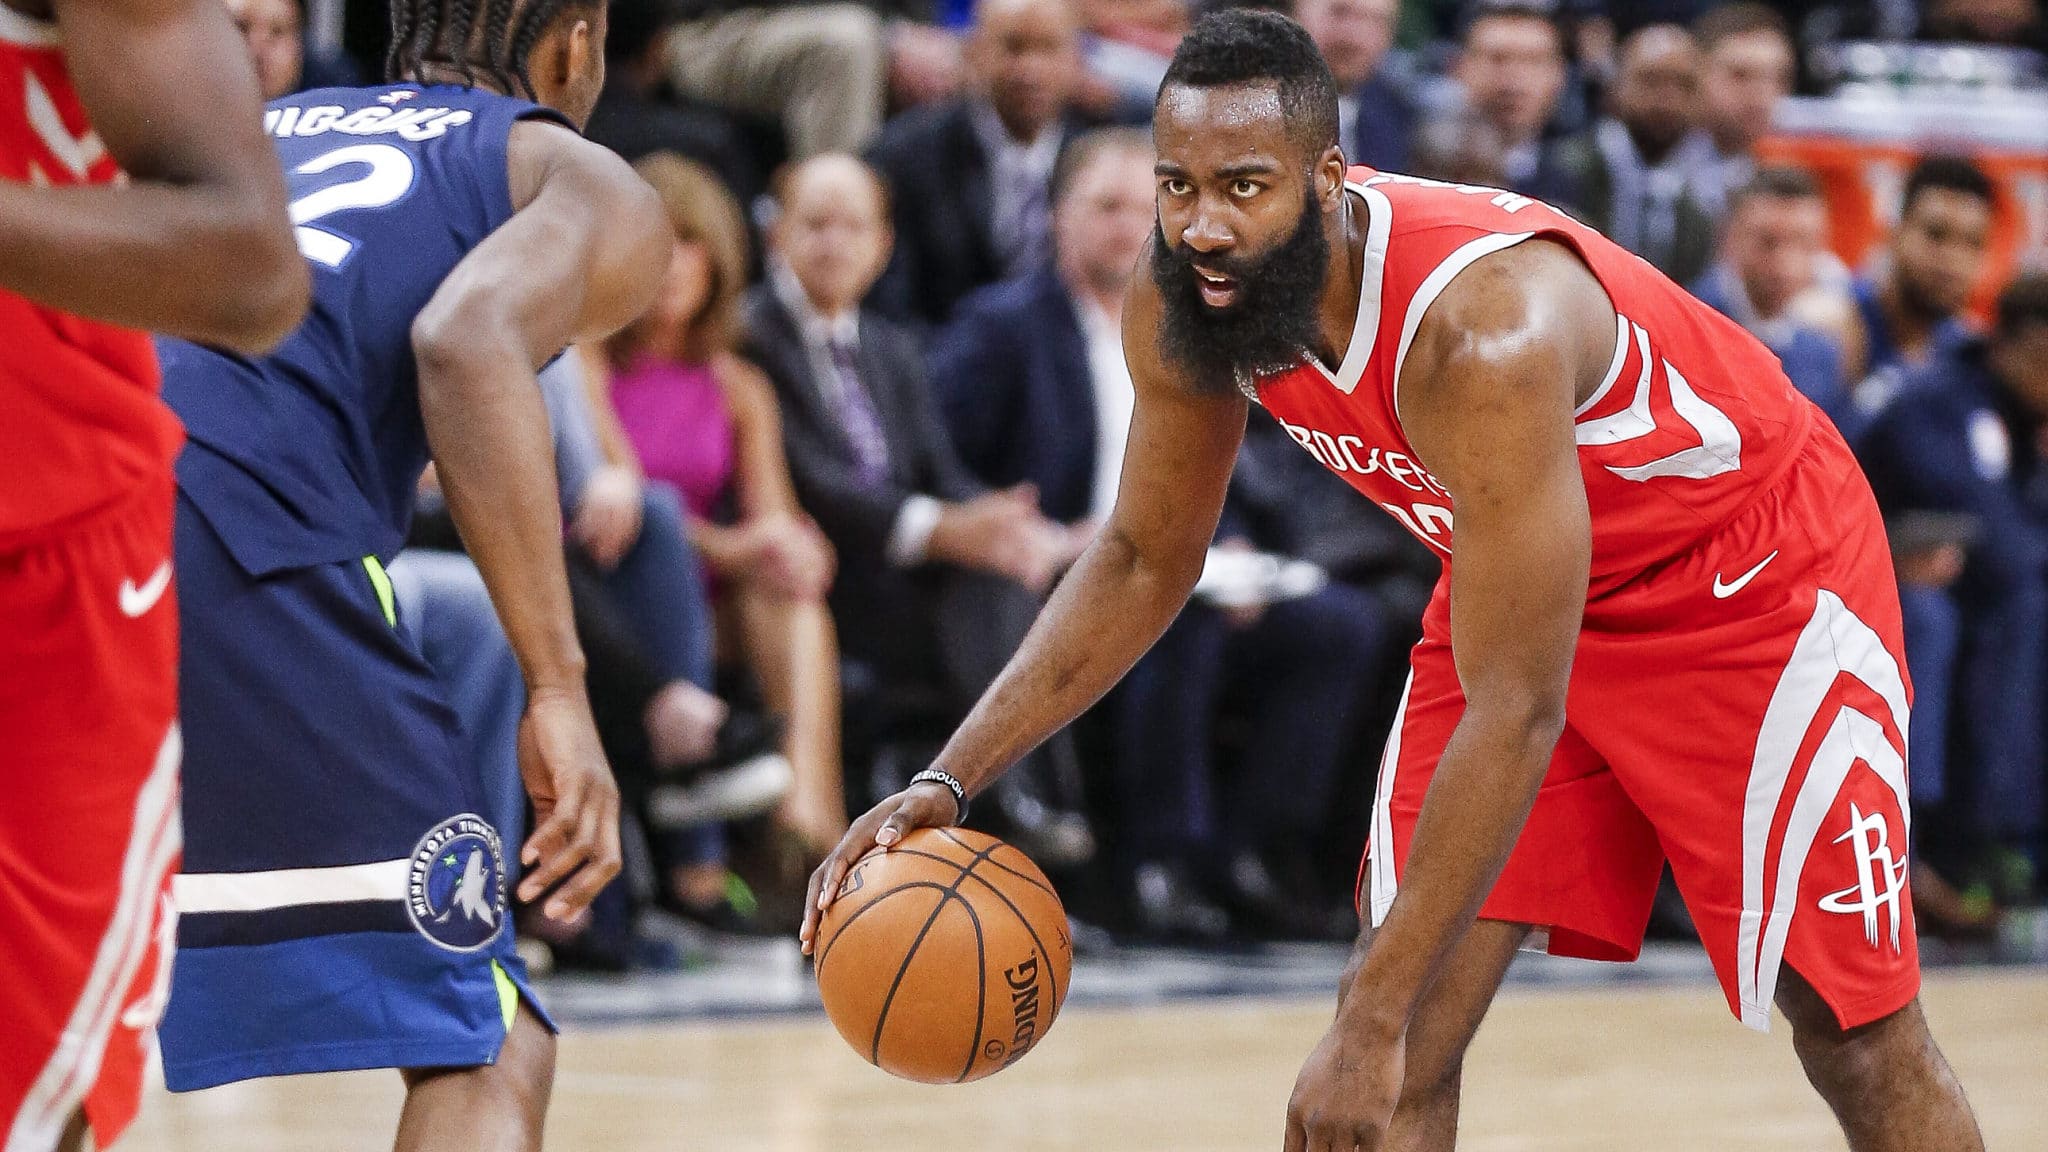 How to Hit a Step Back Like James Harden Without Traveling